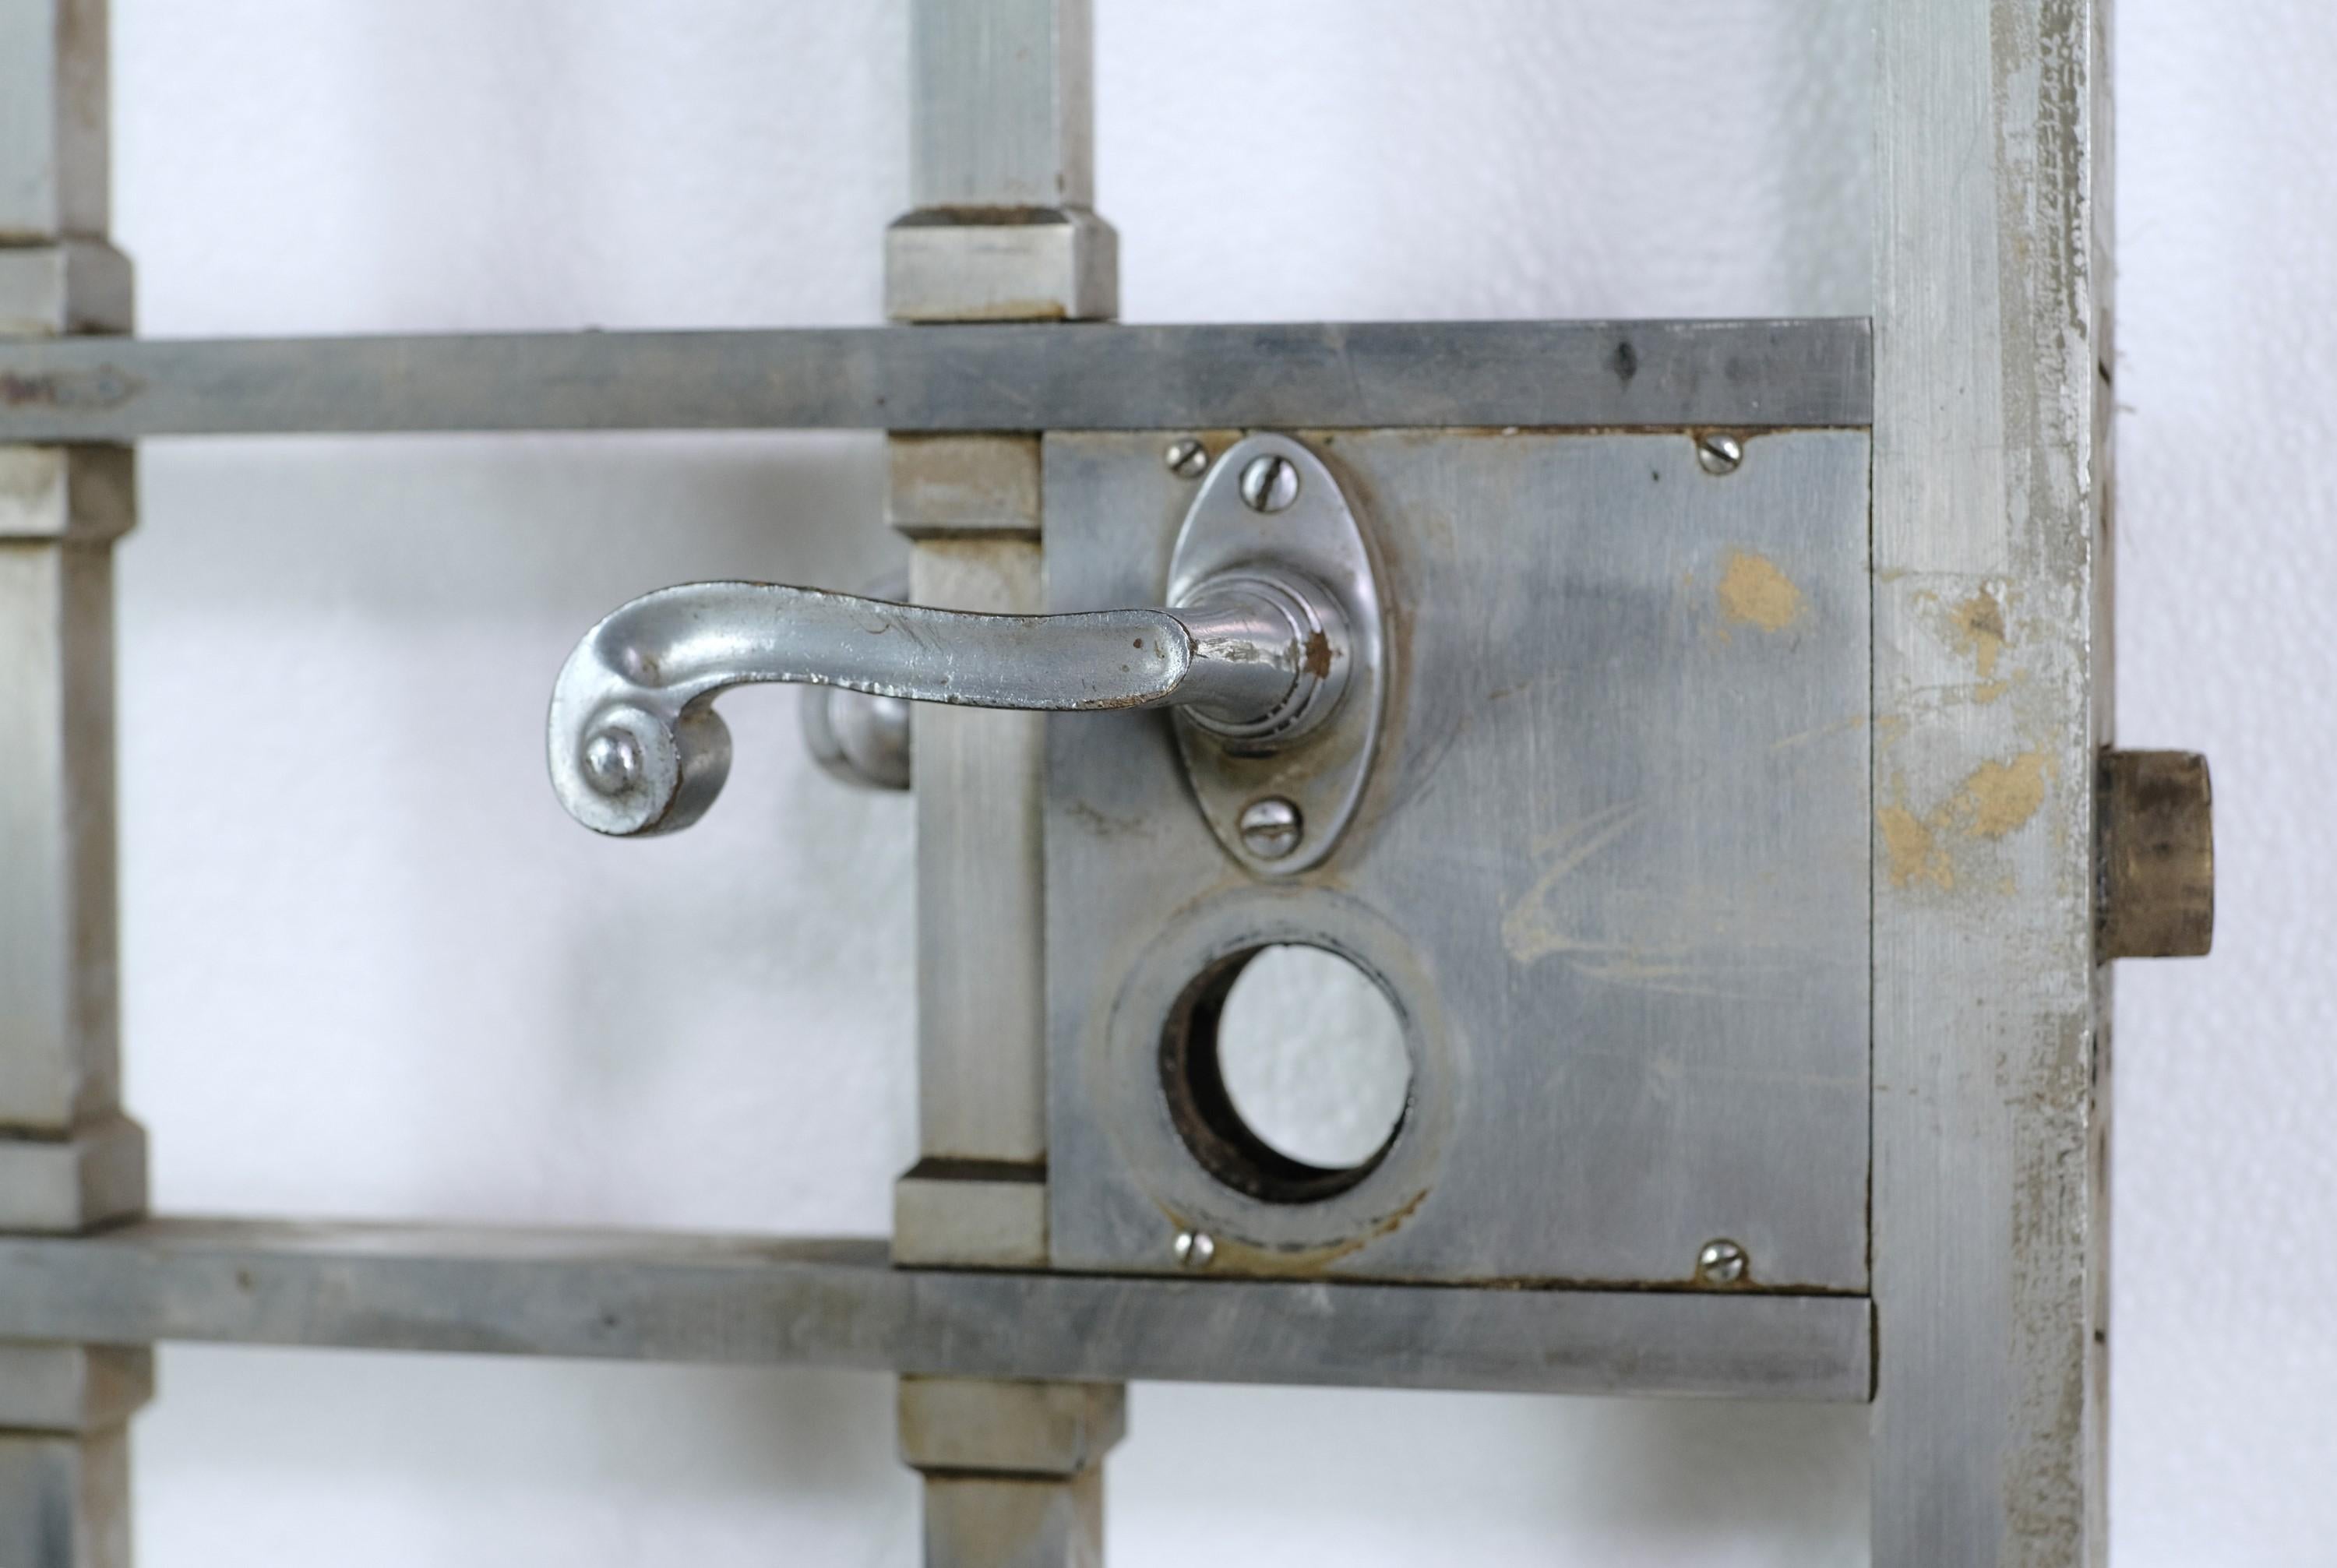 Solid brass entry gate with satin nickel plating and the original lever handles. This was reclaimed from an early 20th century New York City bank or other commercial building. The lever mechanism is working and is ready to receive a newly keyed